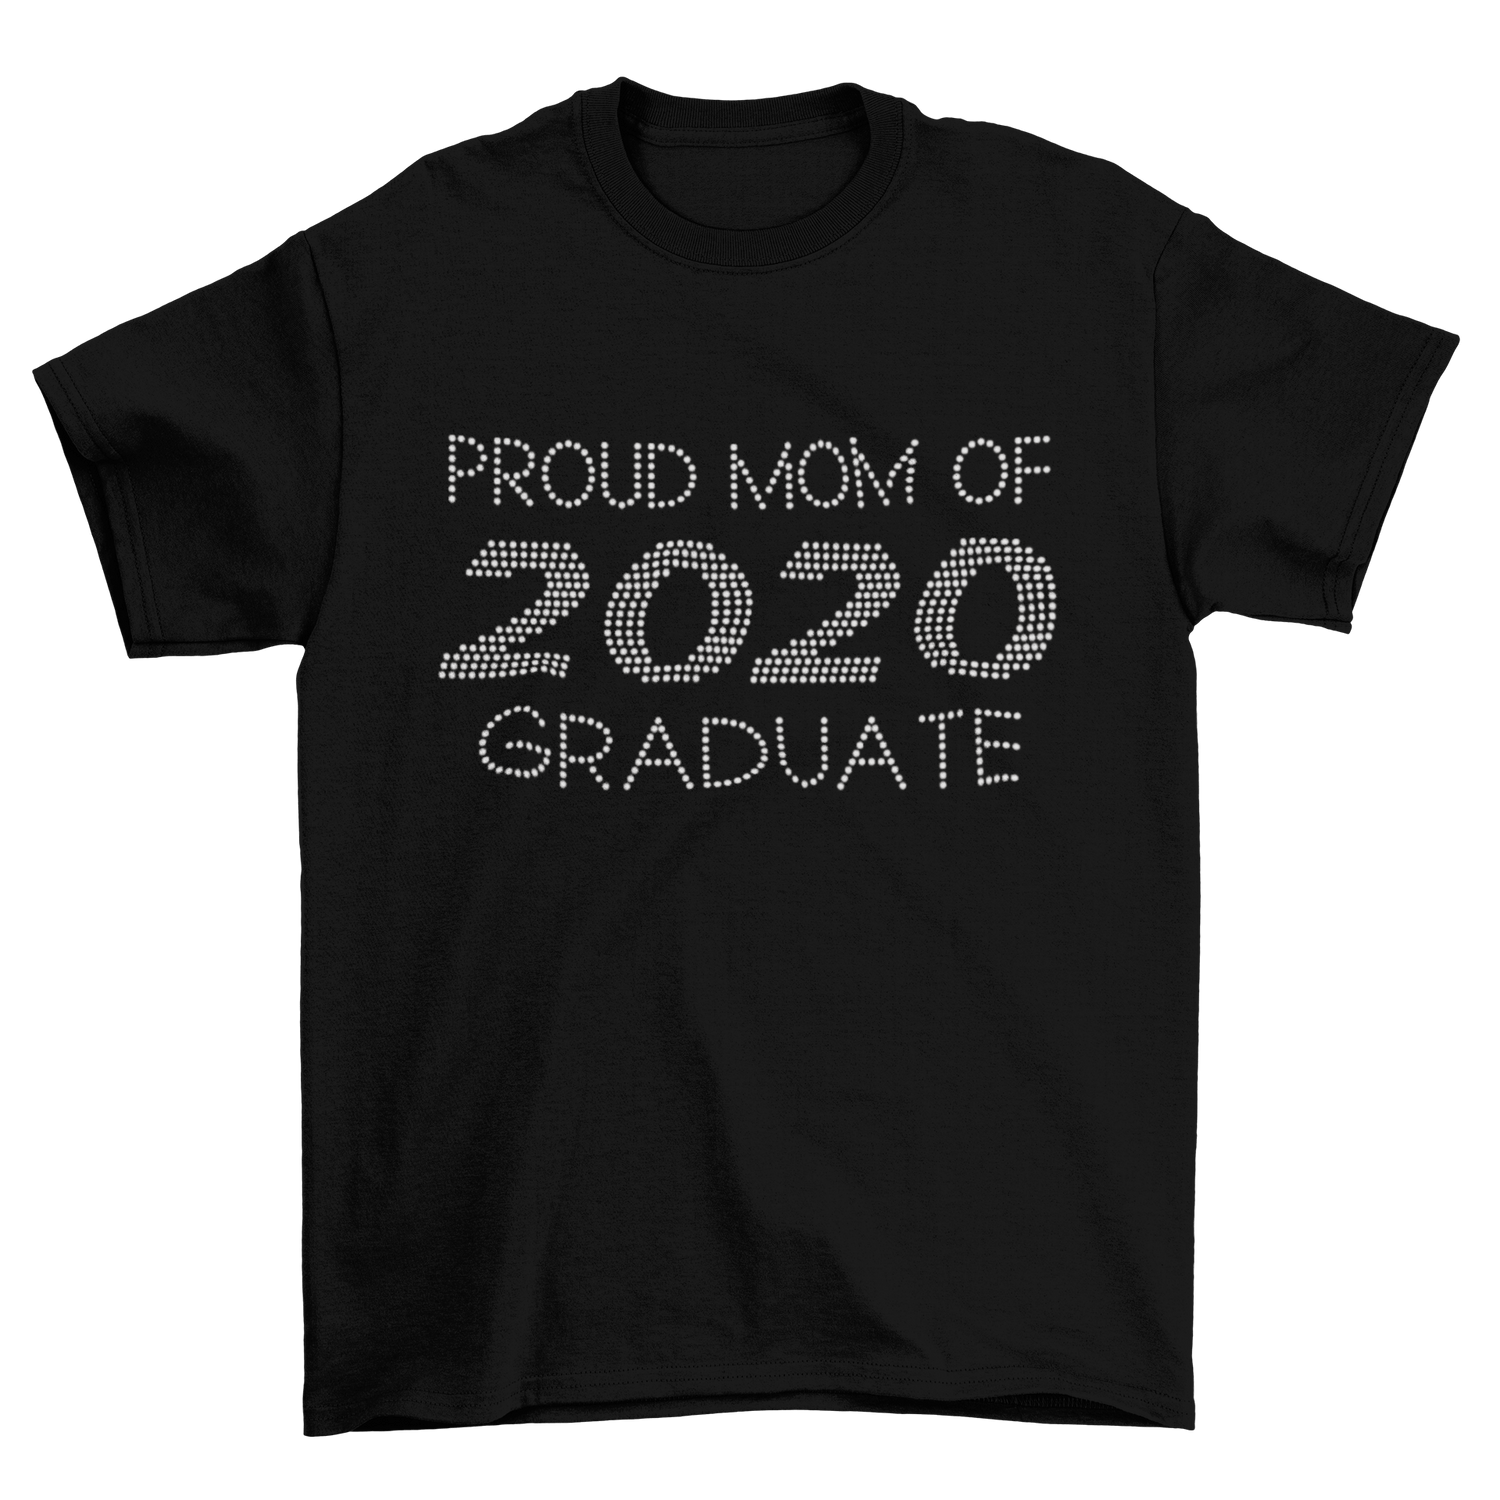 Proud Mom Of A 2020 Graduate Rhinestone T-Shirt-T-Shirt-Get Me Bedazzled